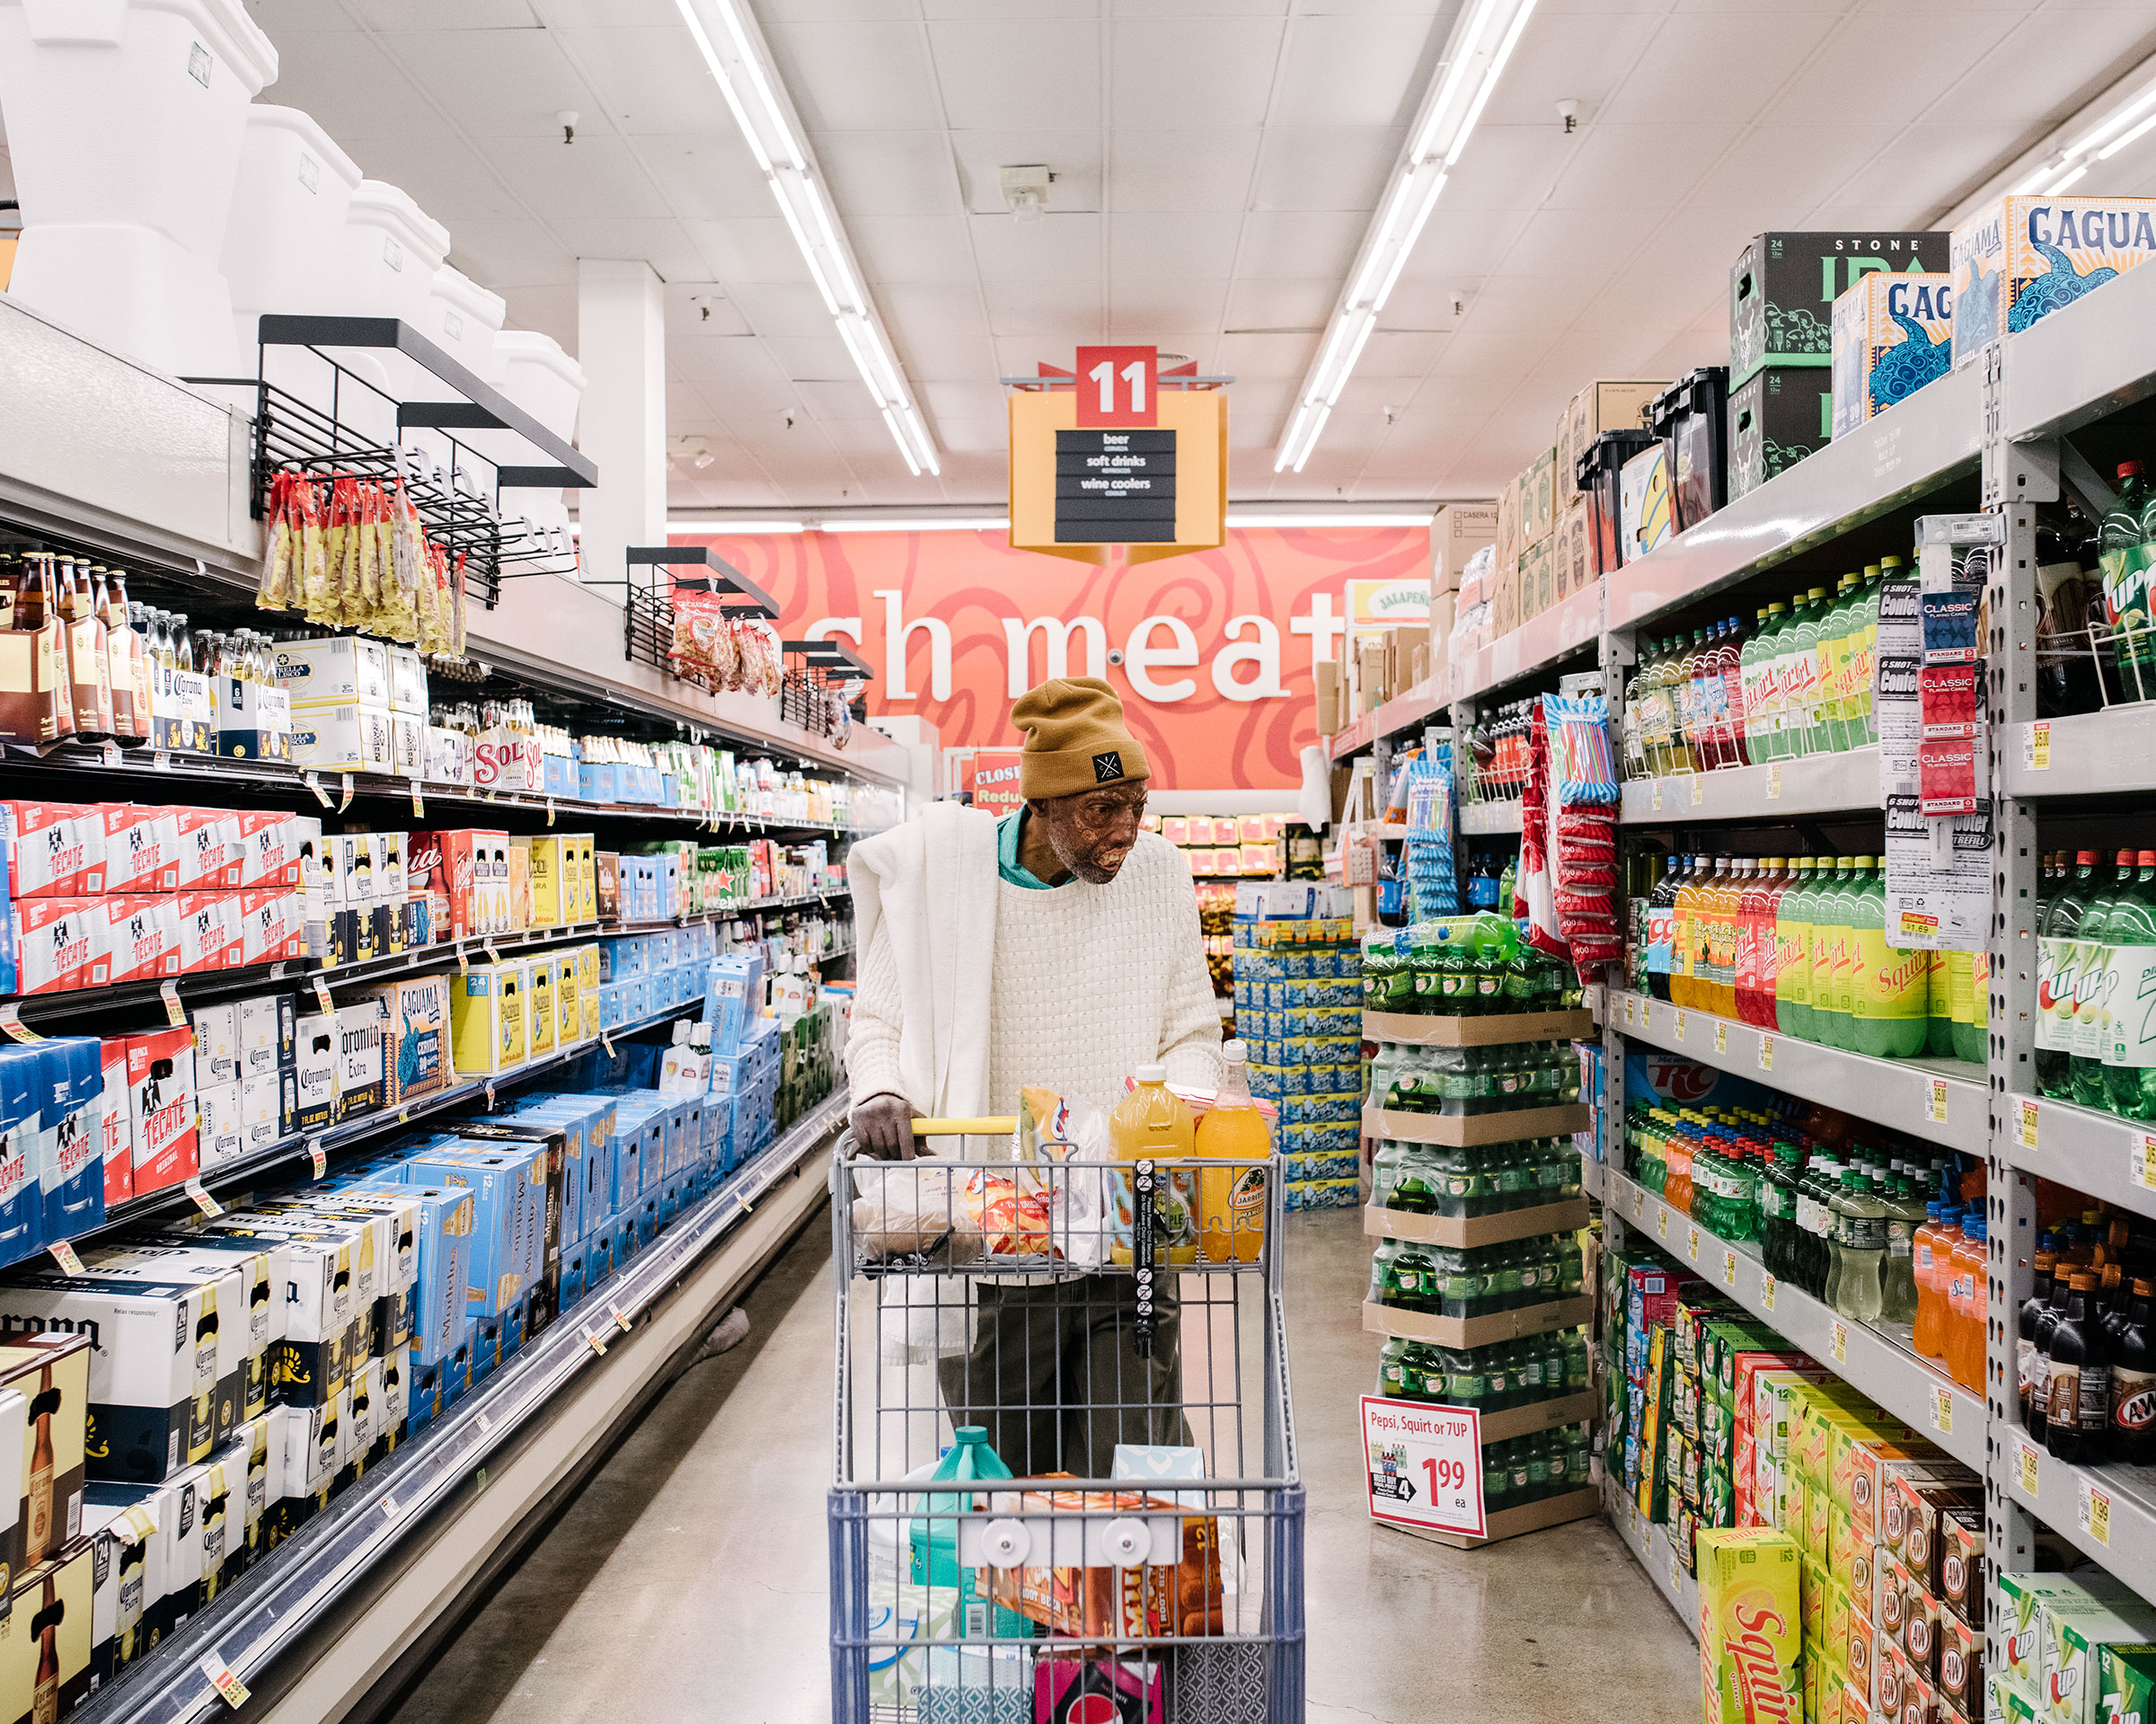 Robert Chelsea shops for groceries at a local market near a friend’s apartment where he was temporarily staying in Los Angeles in February 2019